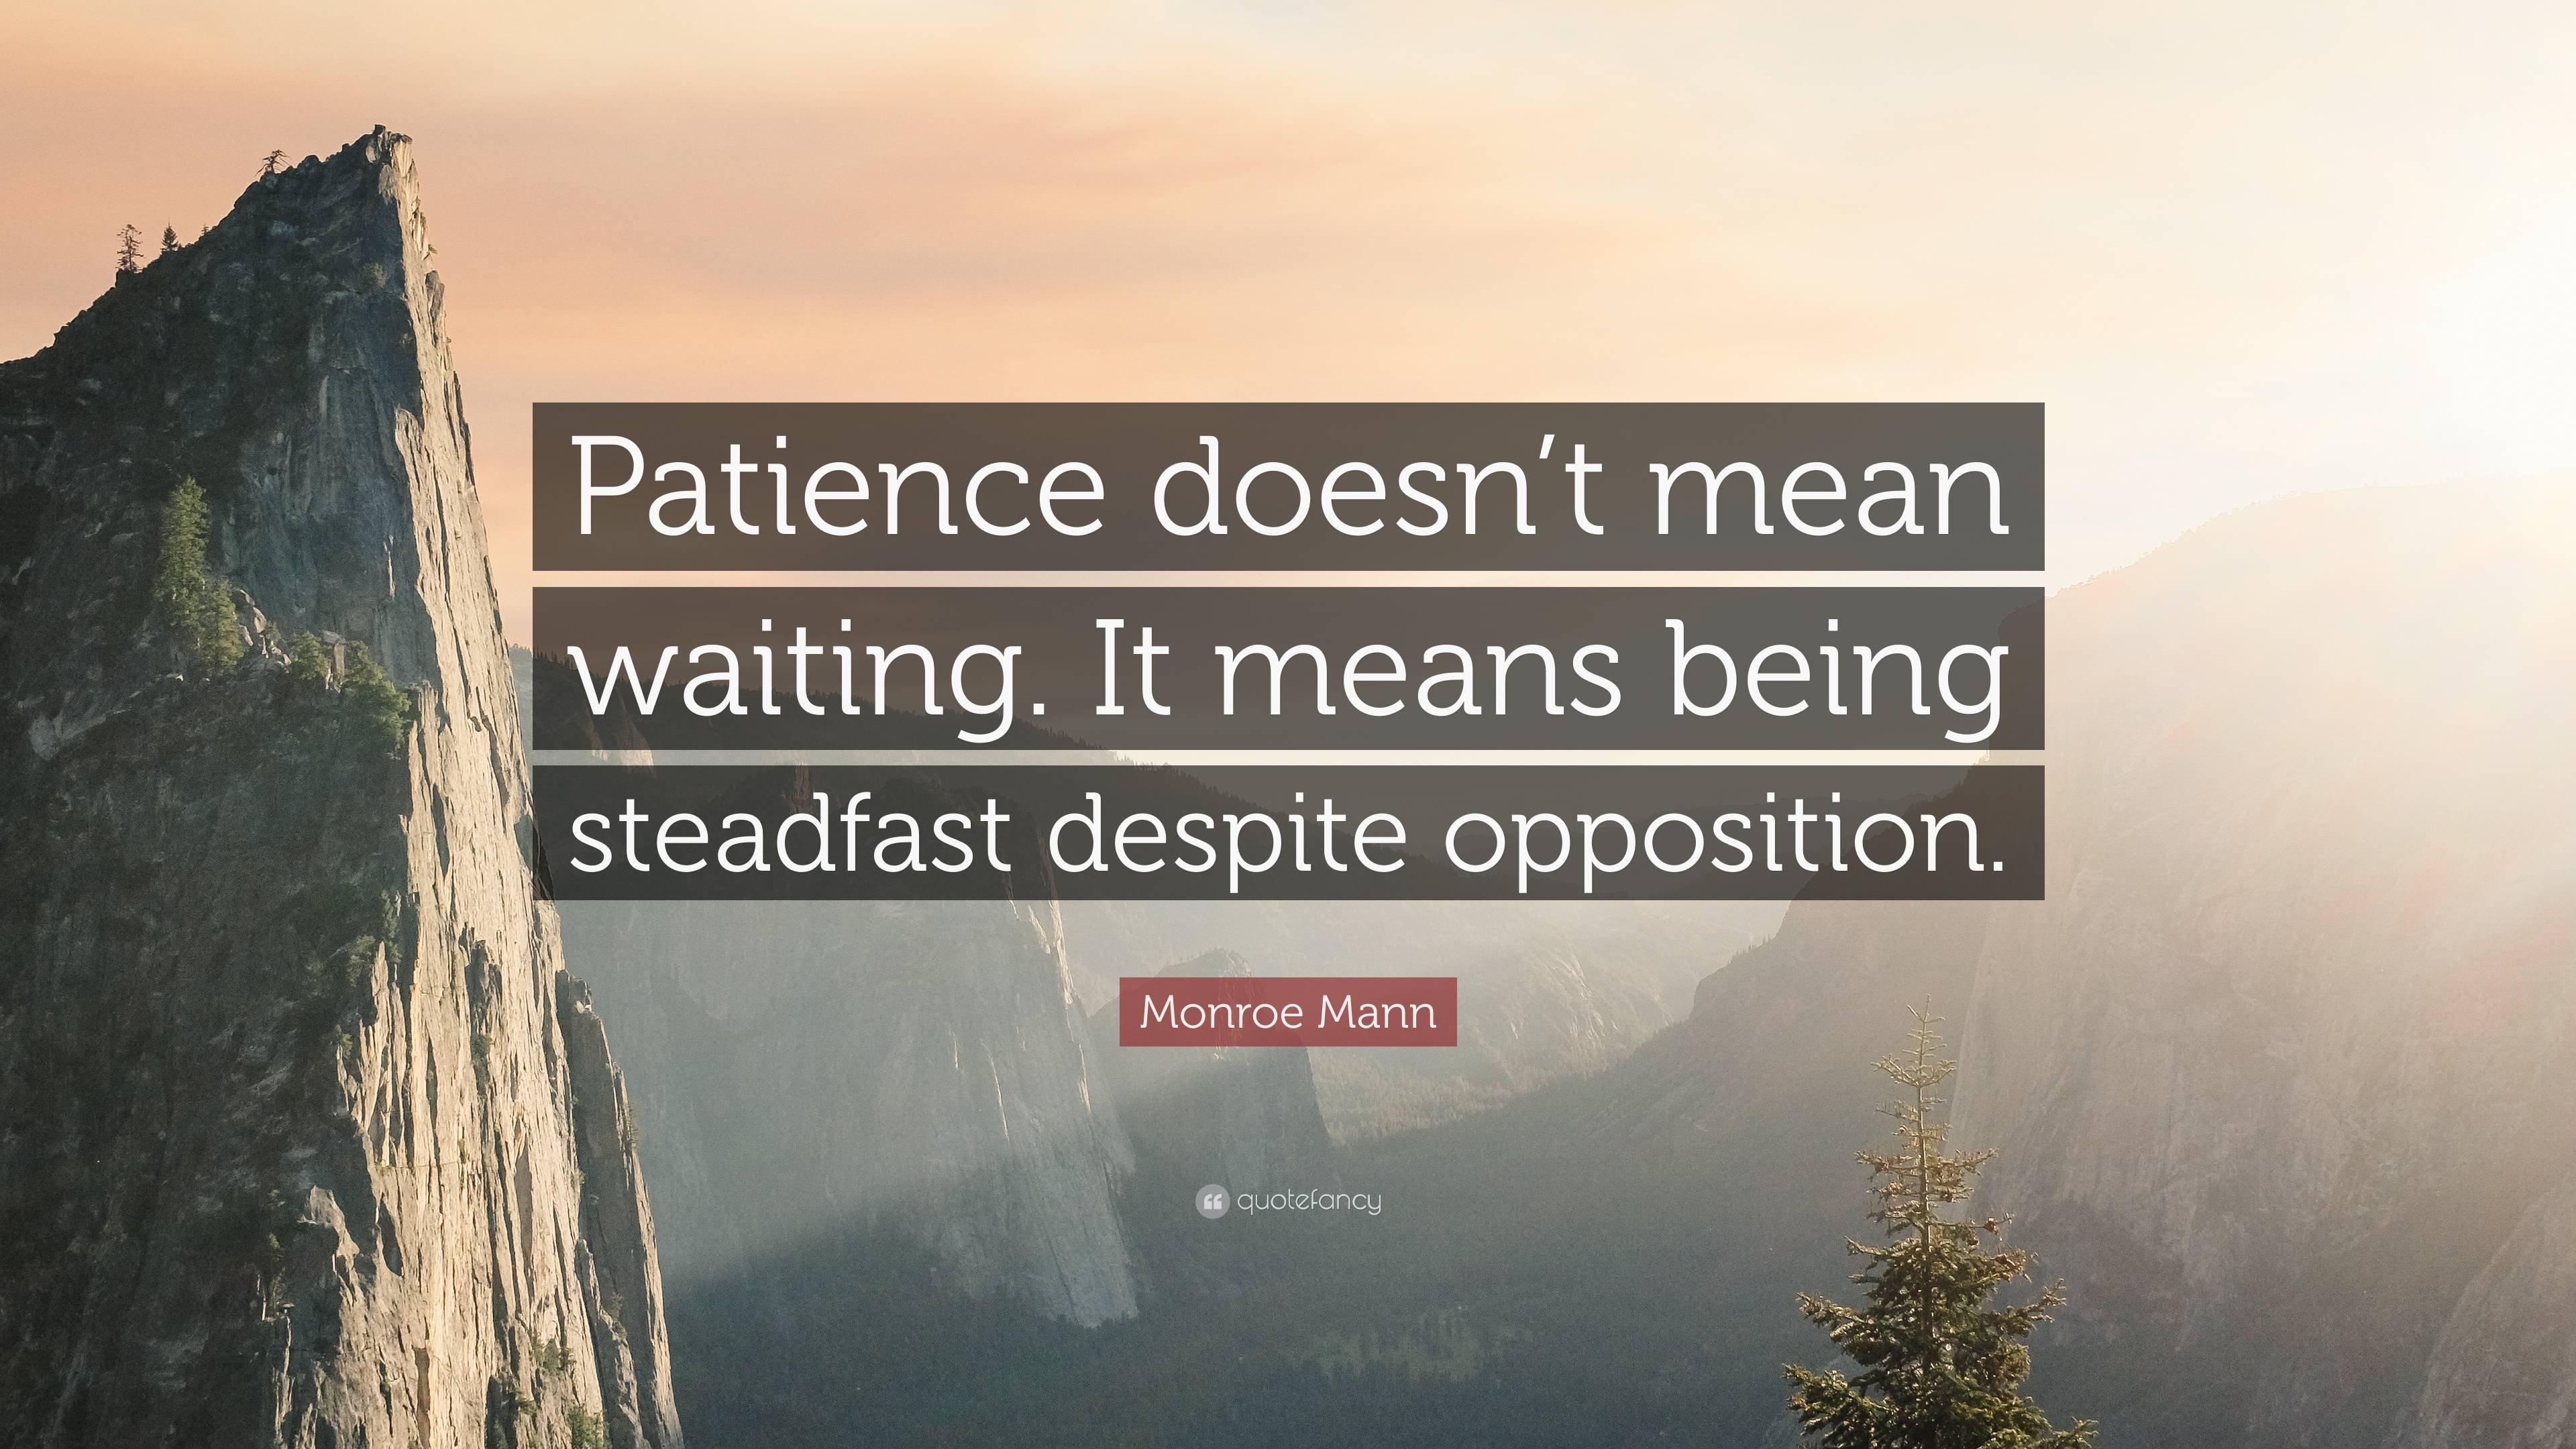 https://quotefancy.com/media/wallpaper/3840x2160/7464282-Monroe-Mann-Quote-Patience-doesn-t-mean-waiting-It-means-being.jpg